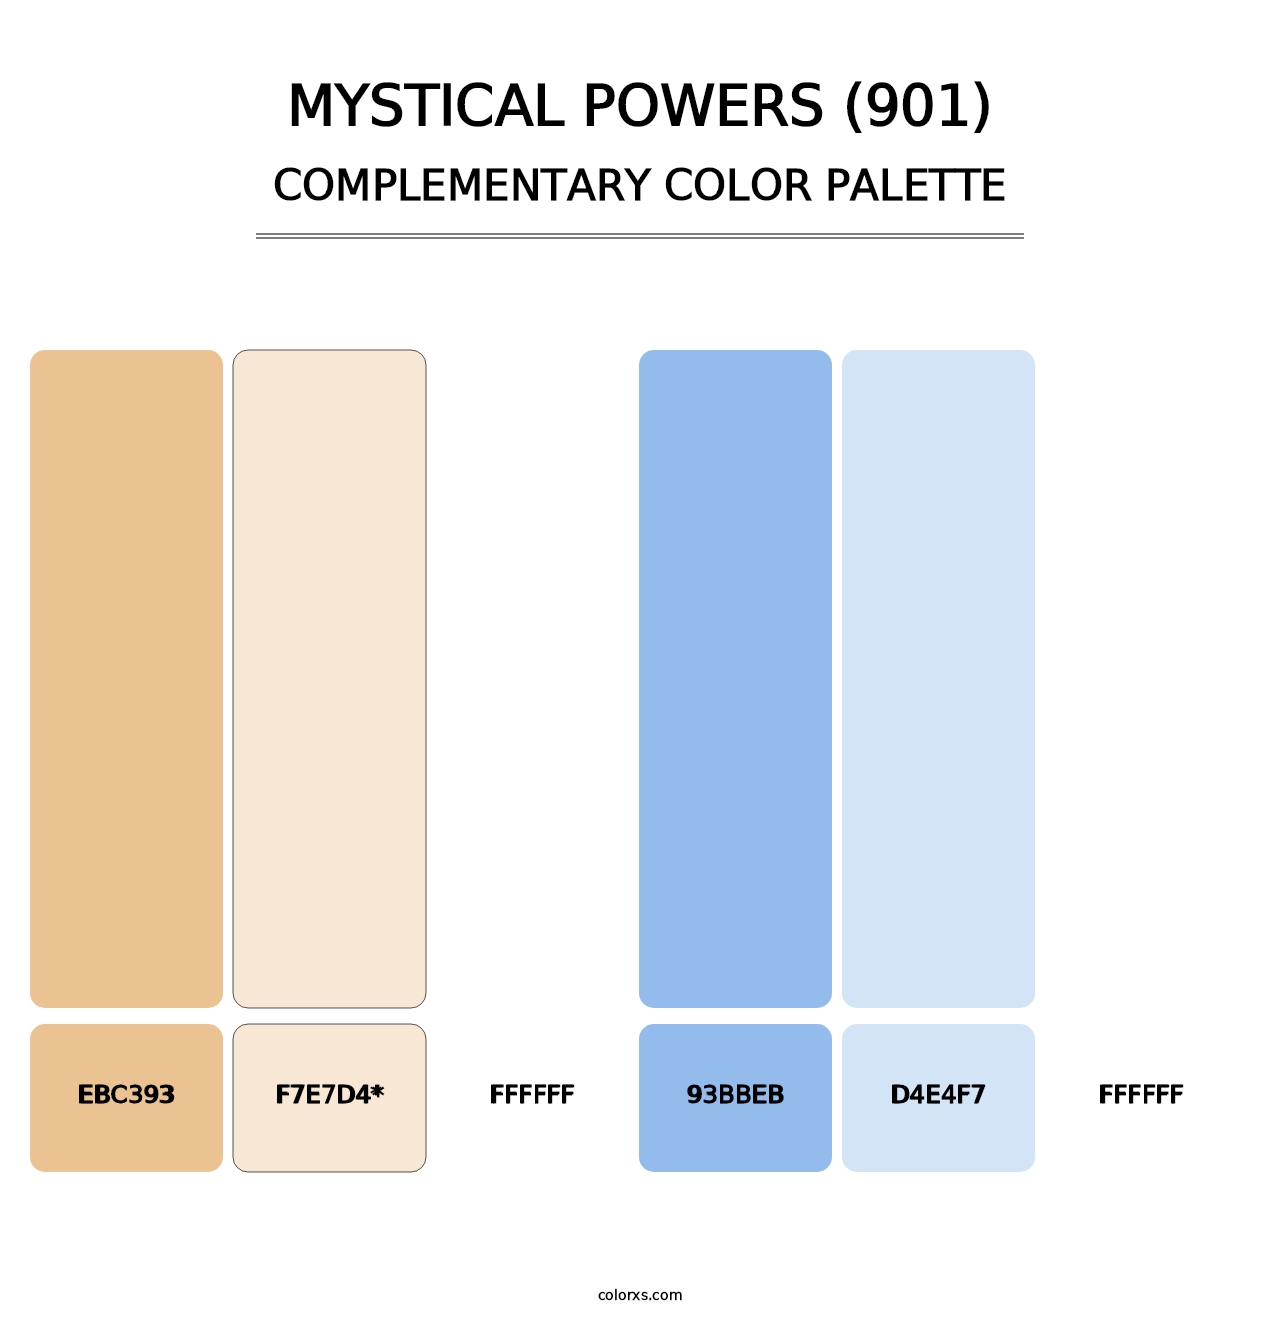 Mystical Powers (901) - Complementary Color Palette